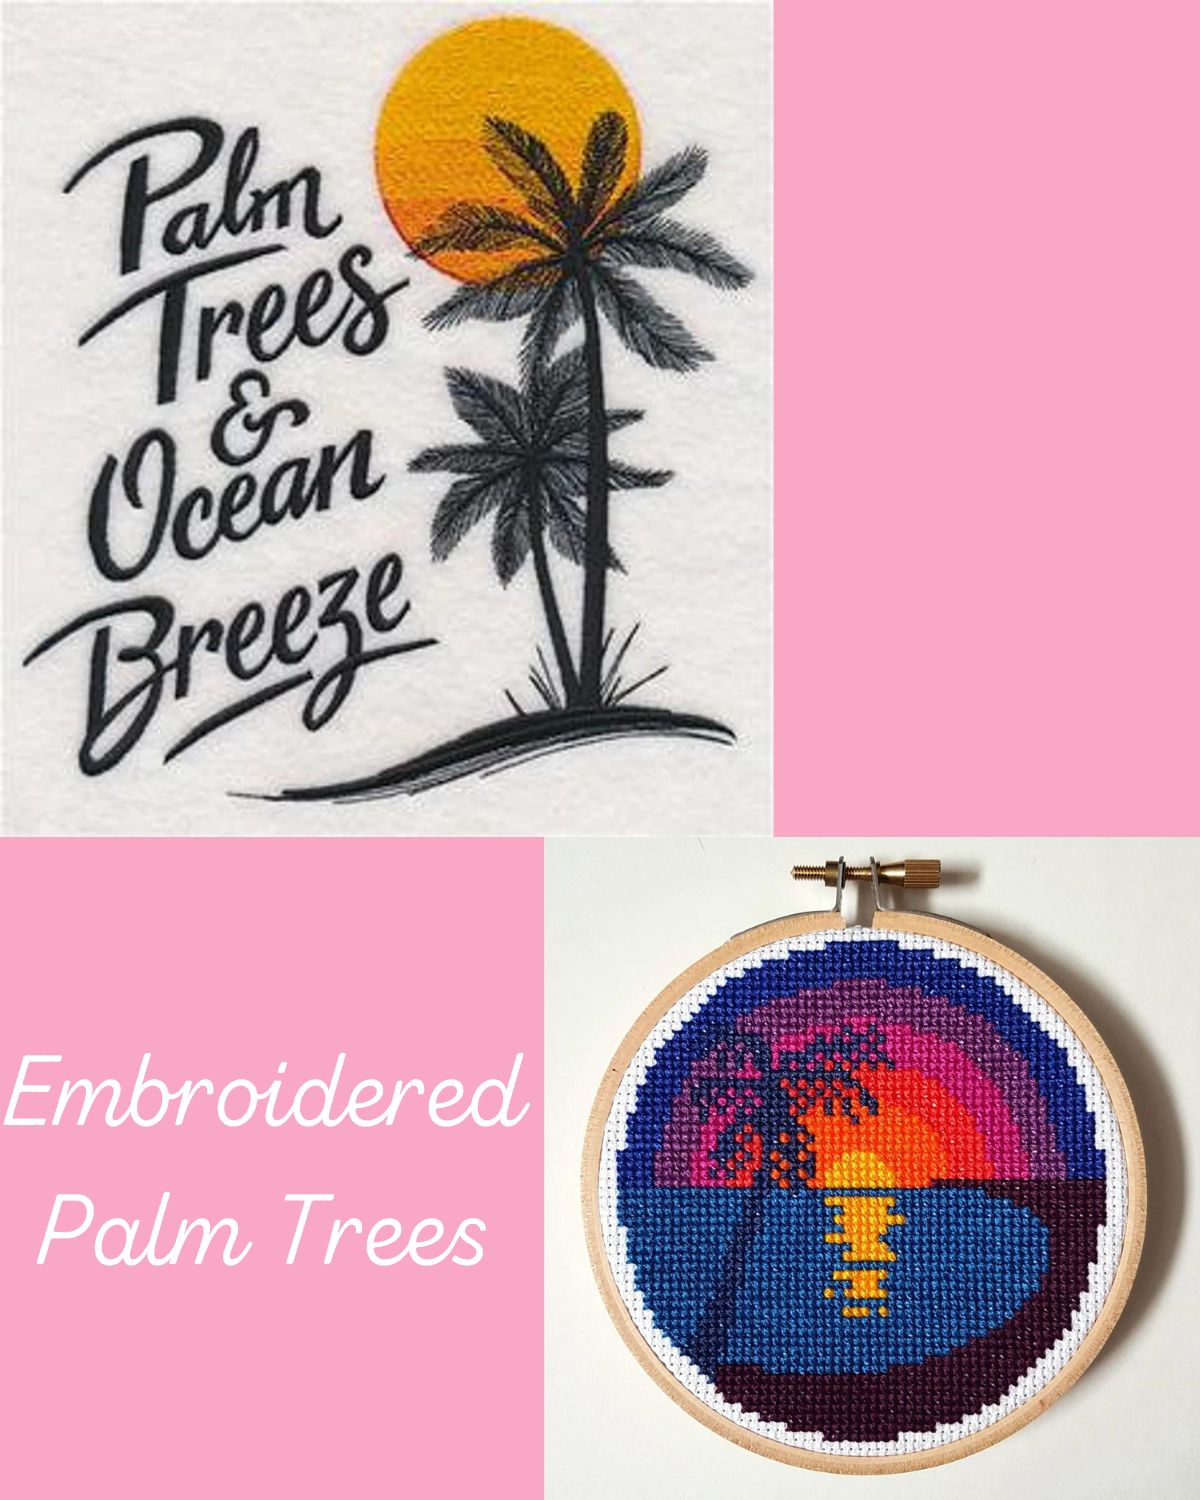 Palm tree embroidery projects